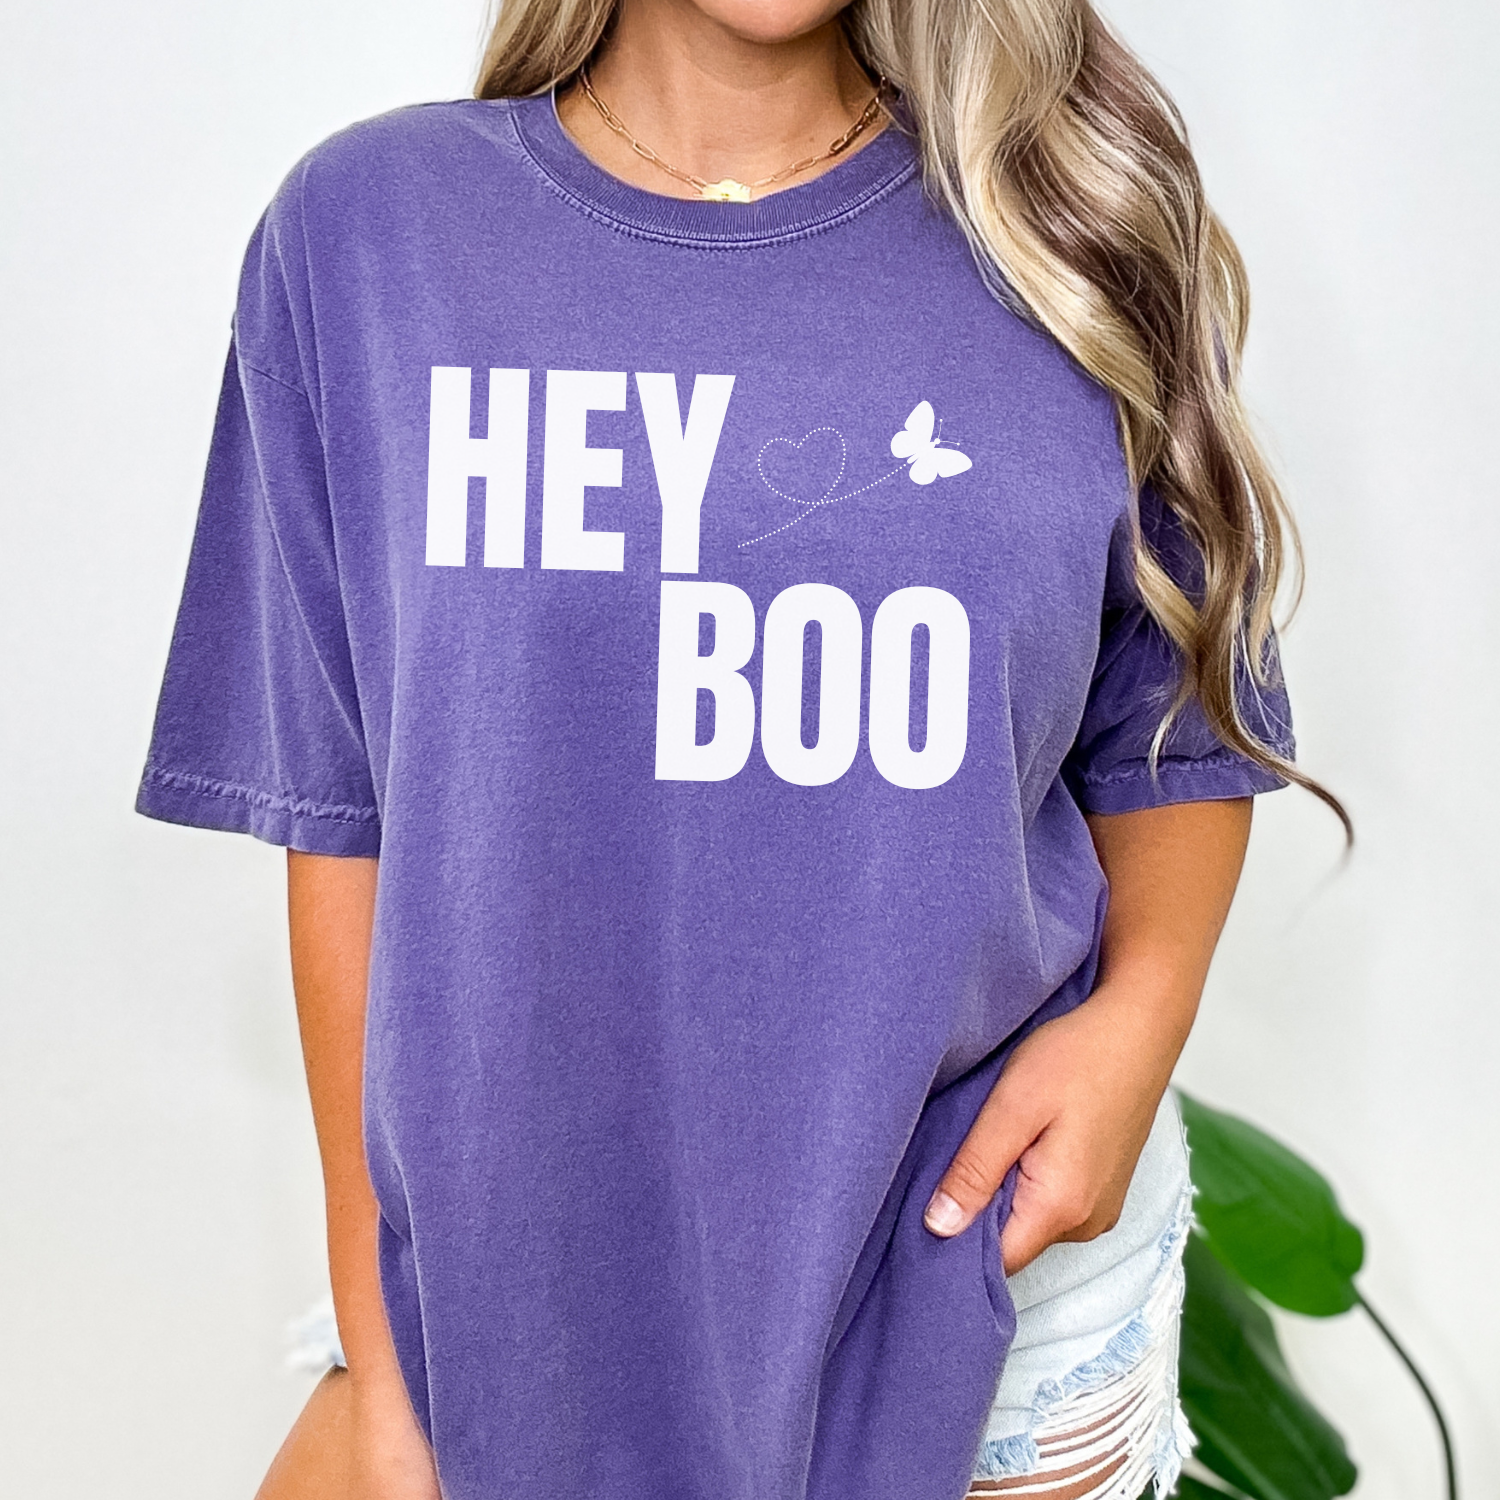 Grape dog-themed tee from the Hey Boo Collection